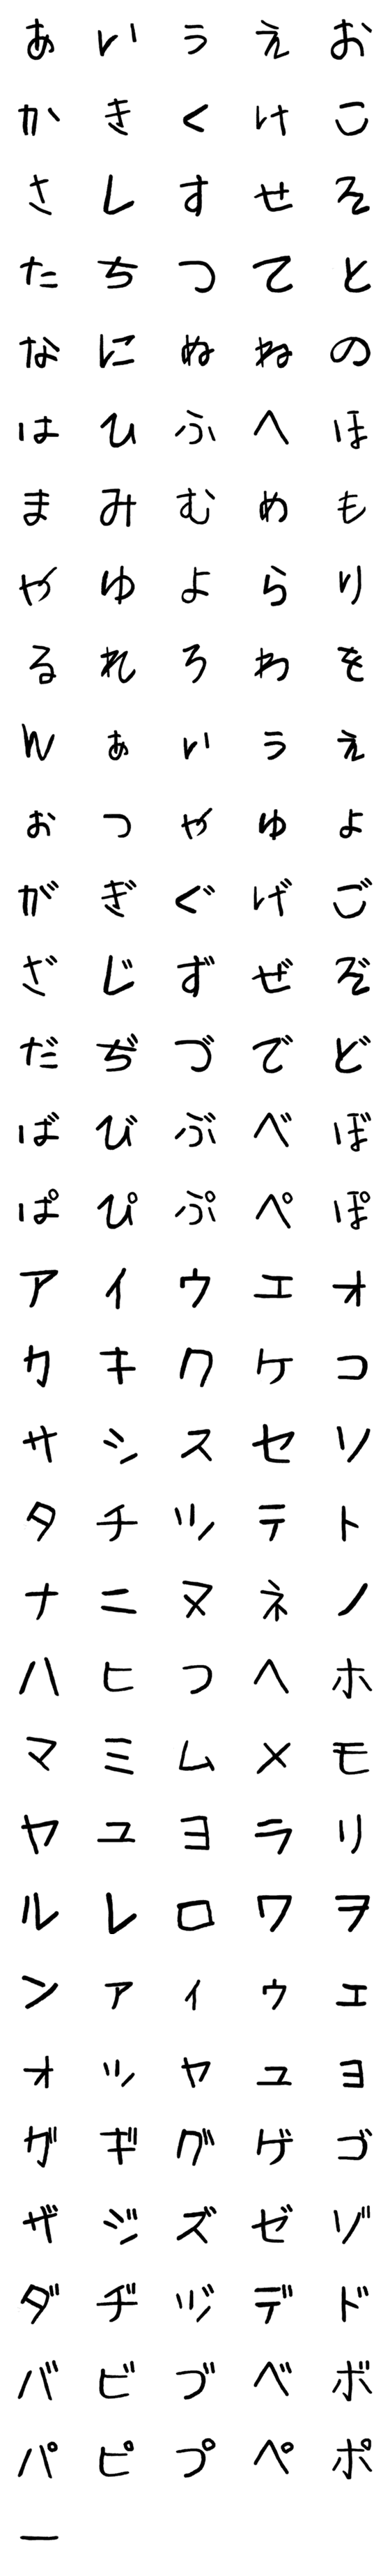 [LINE絵文字]子供の字の画像一覧